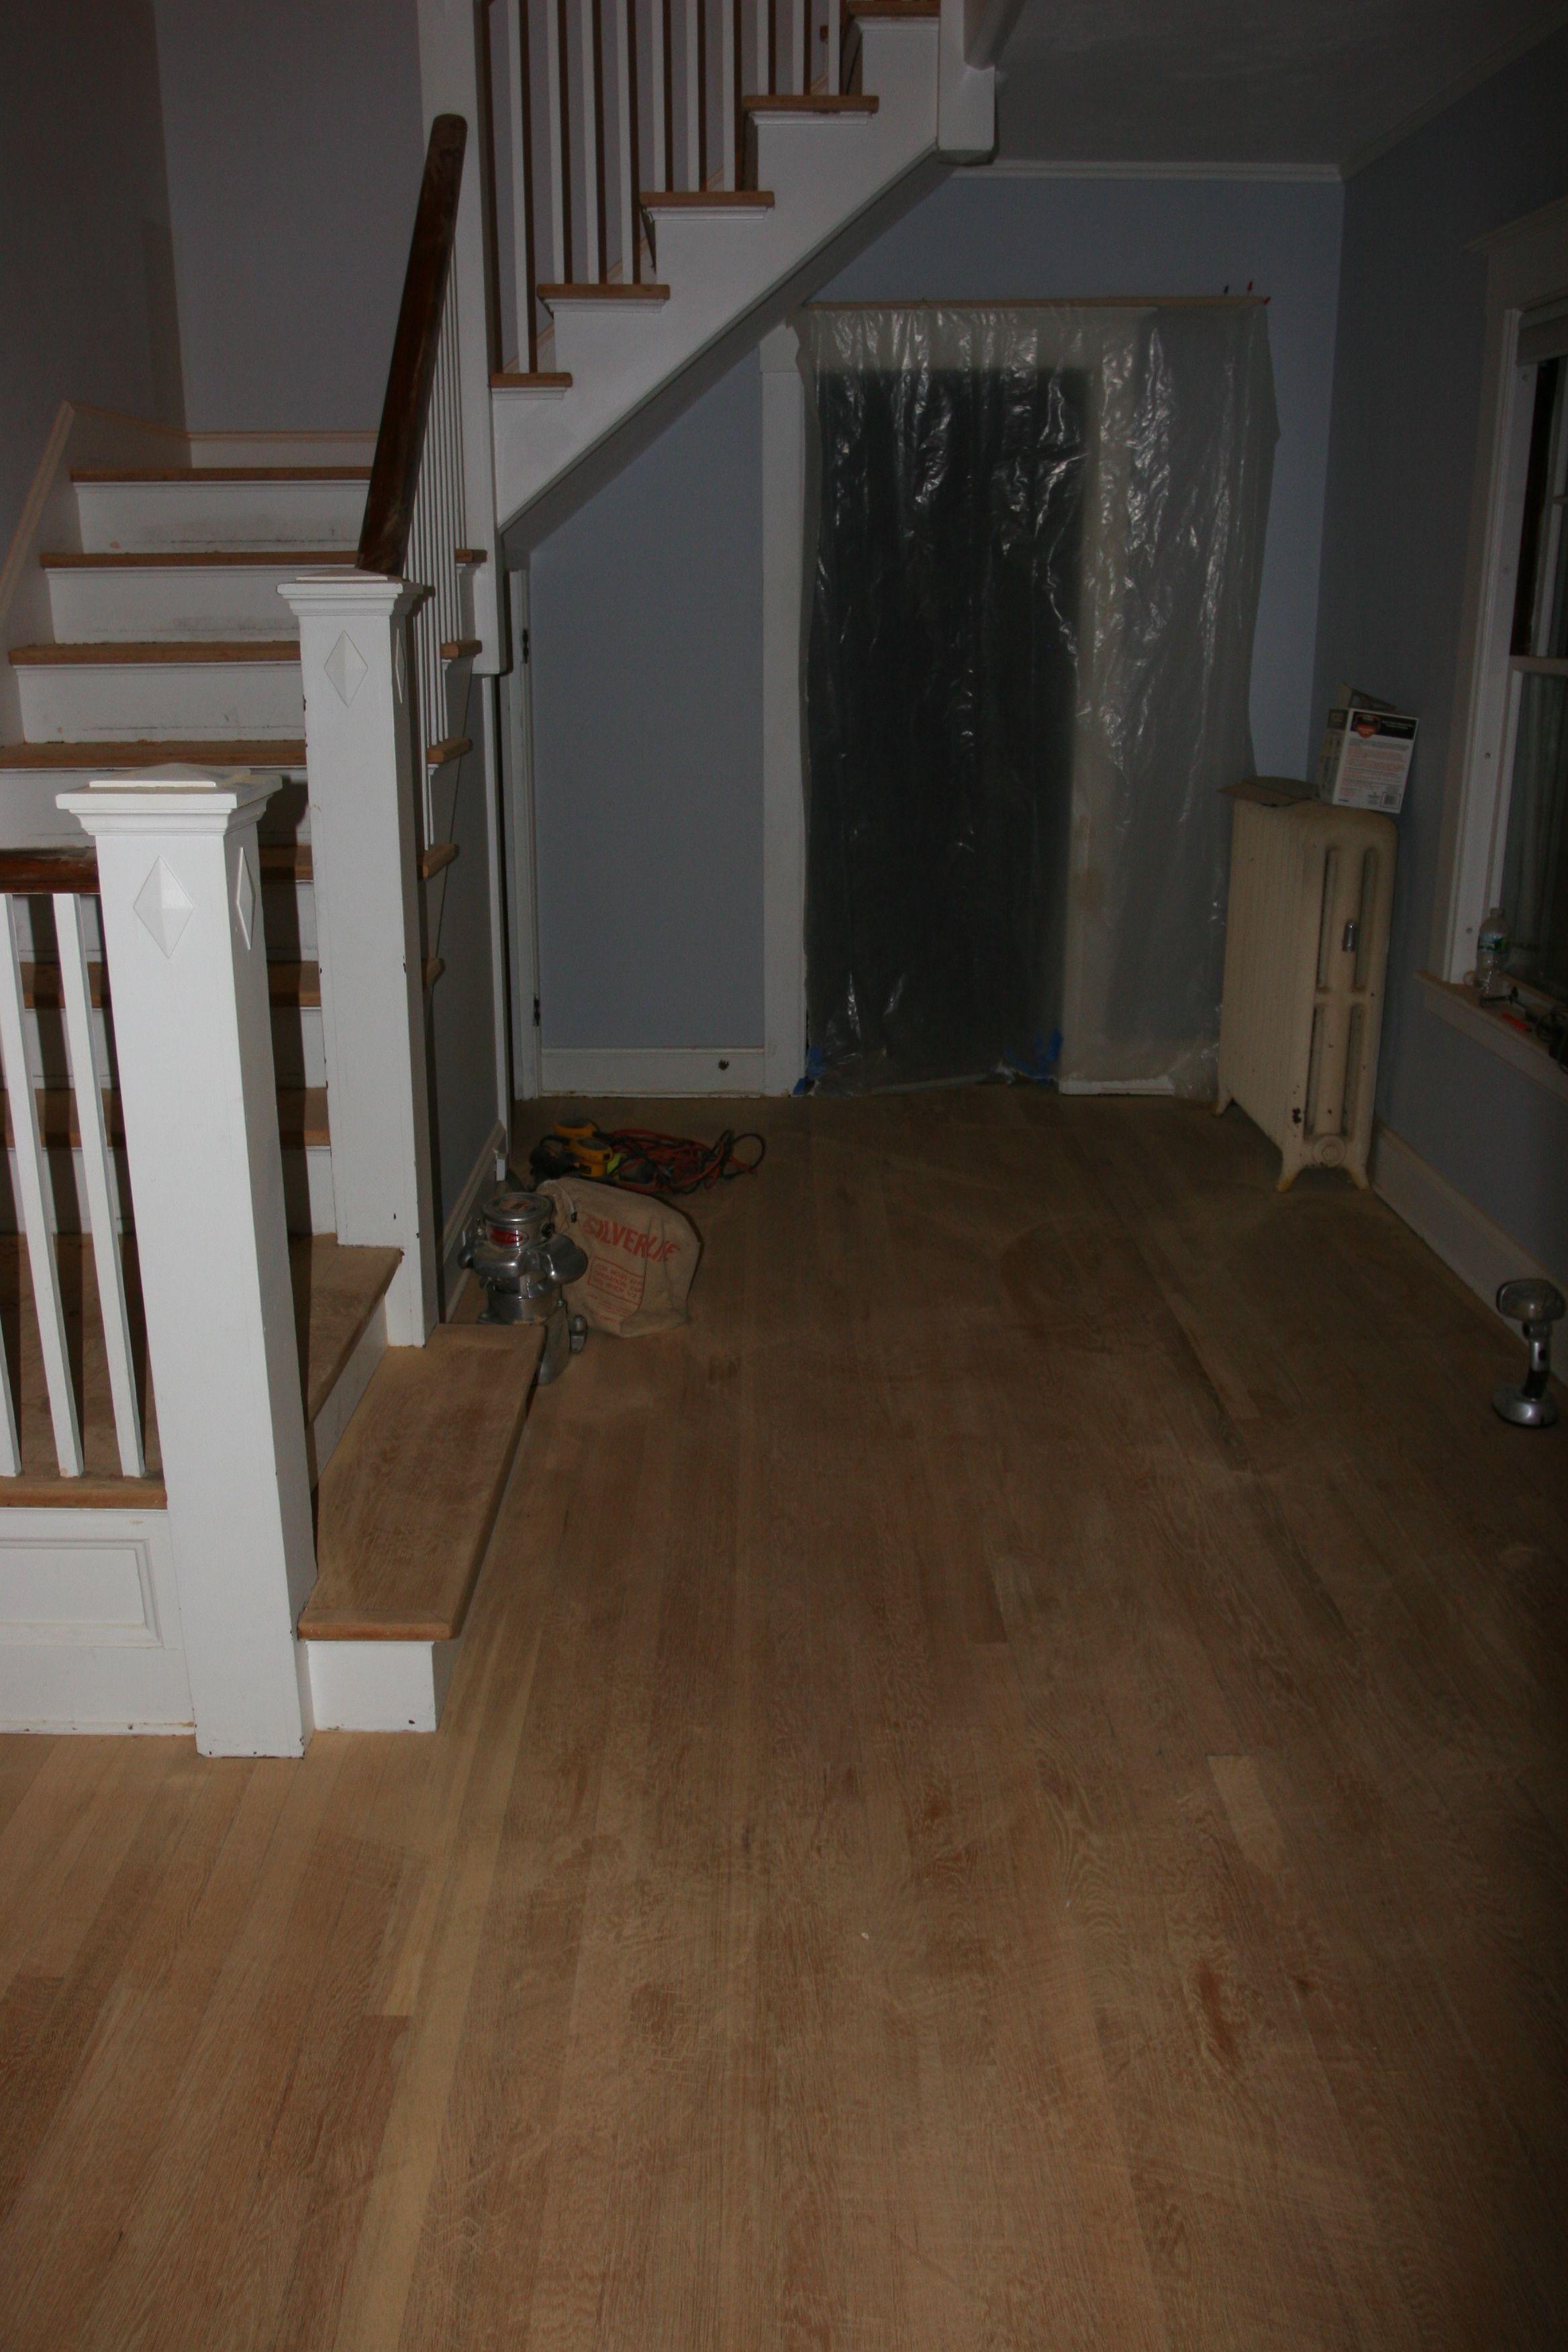 The remains of the day - each stair was scraped, and readied for a stain coat tomorrow.